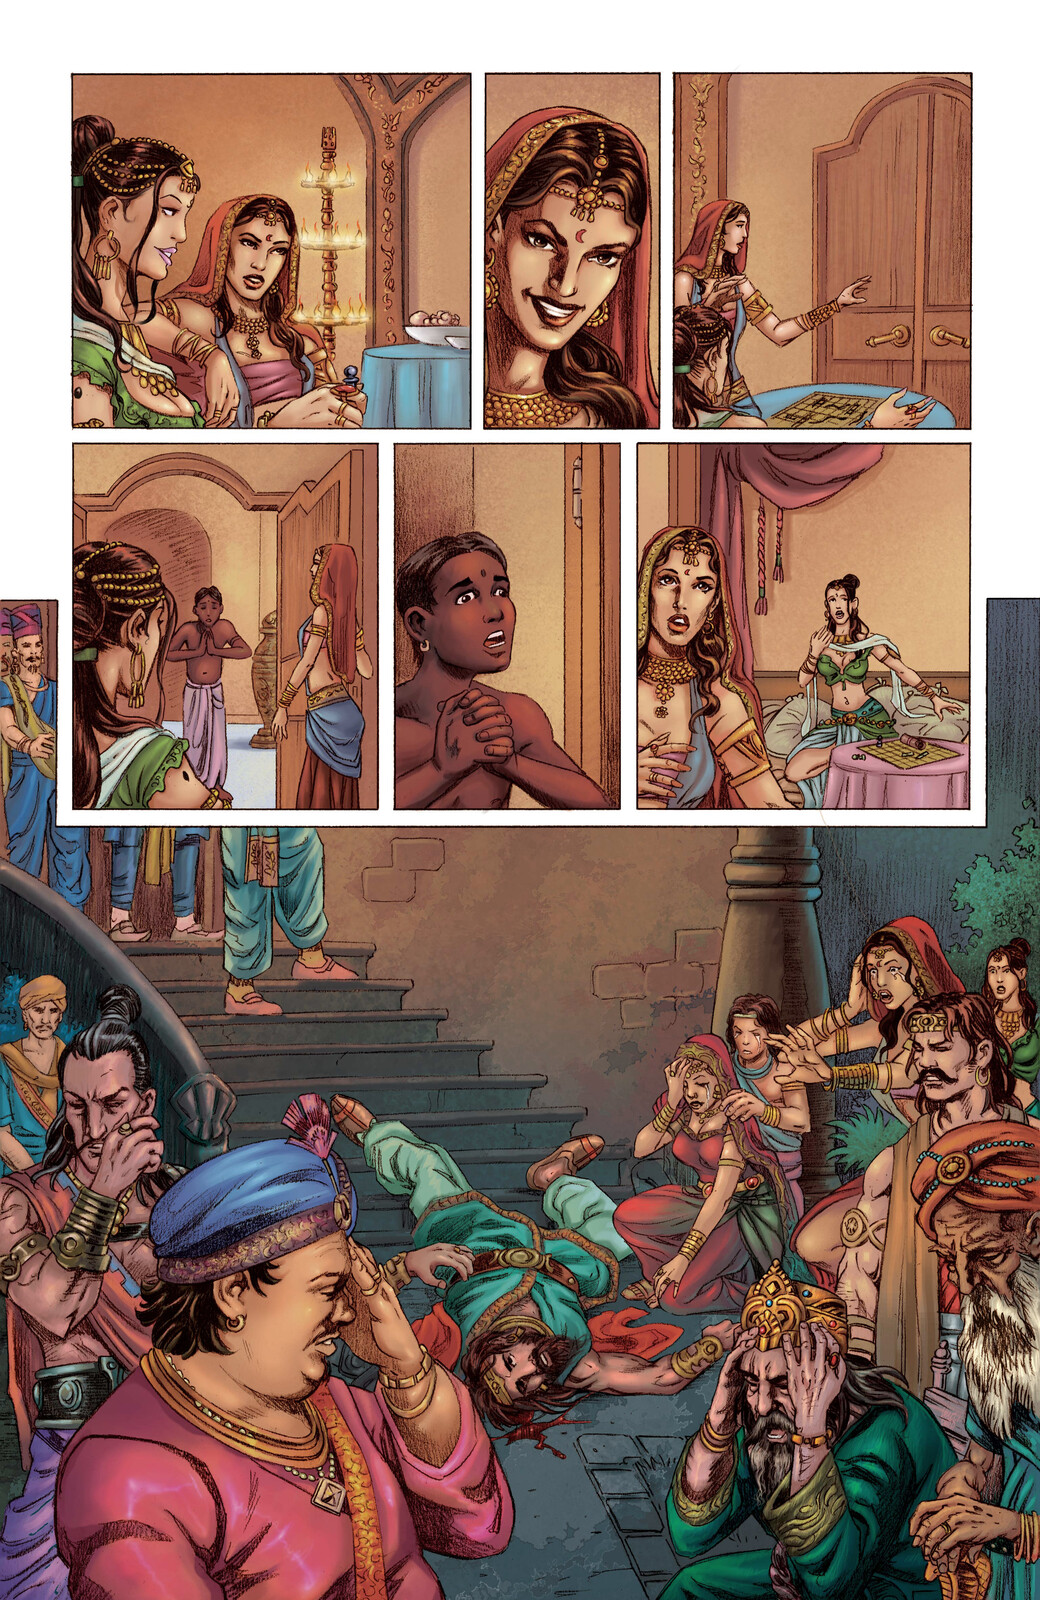 Scions of the Cursed King
Page 5, color by Santosh Pillewar